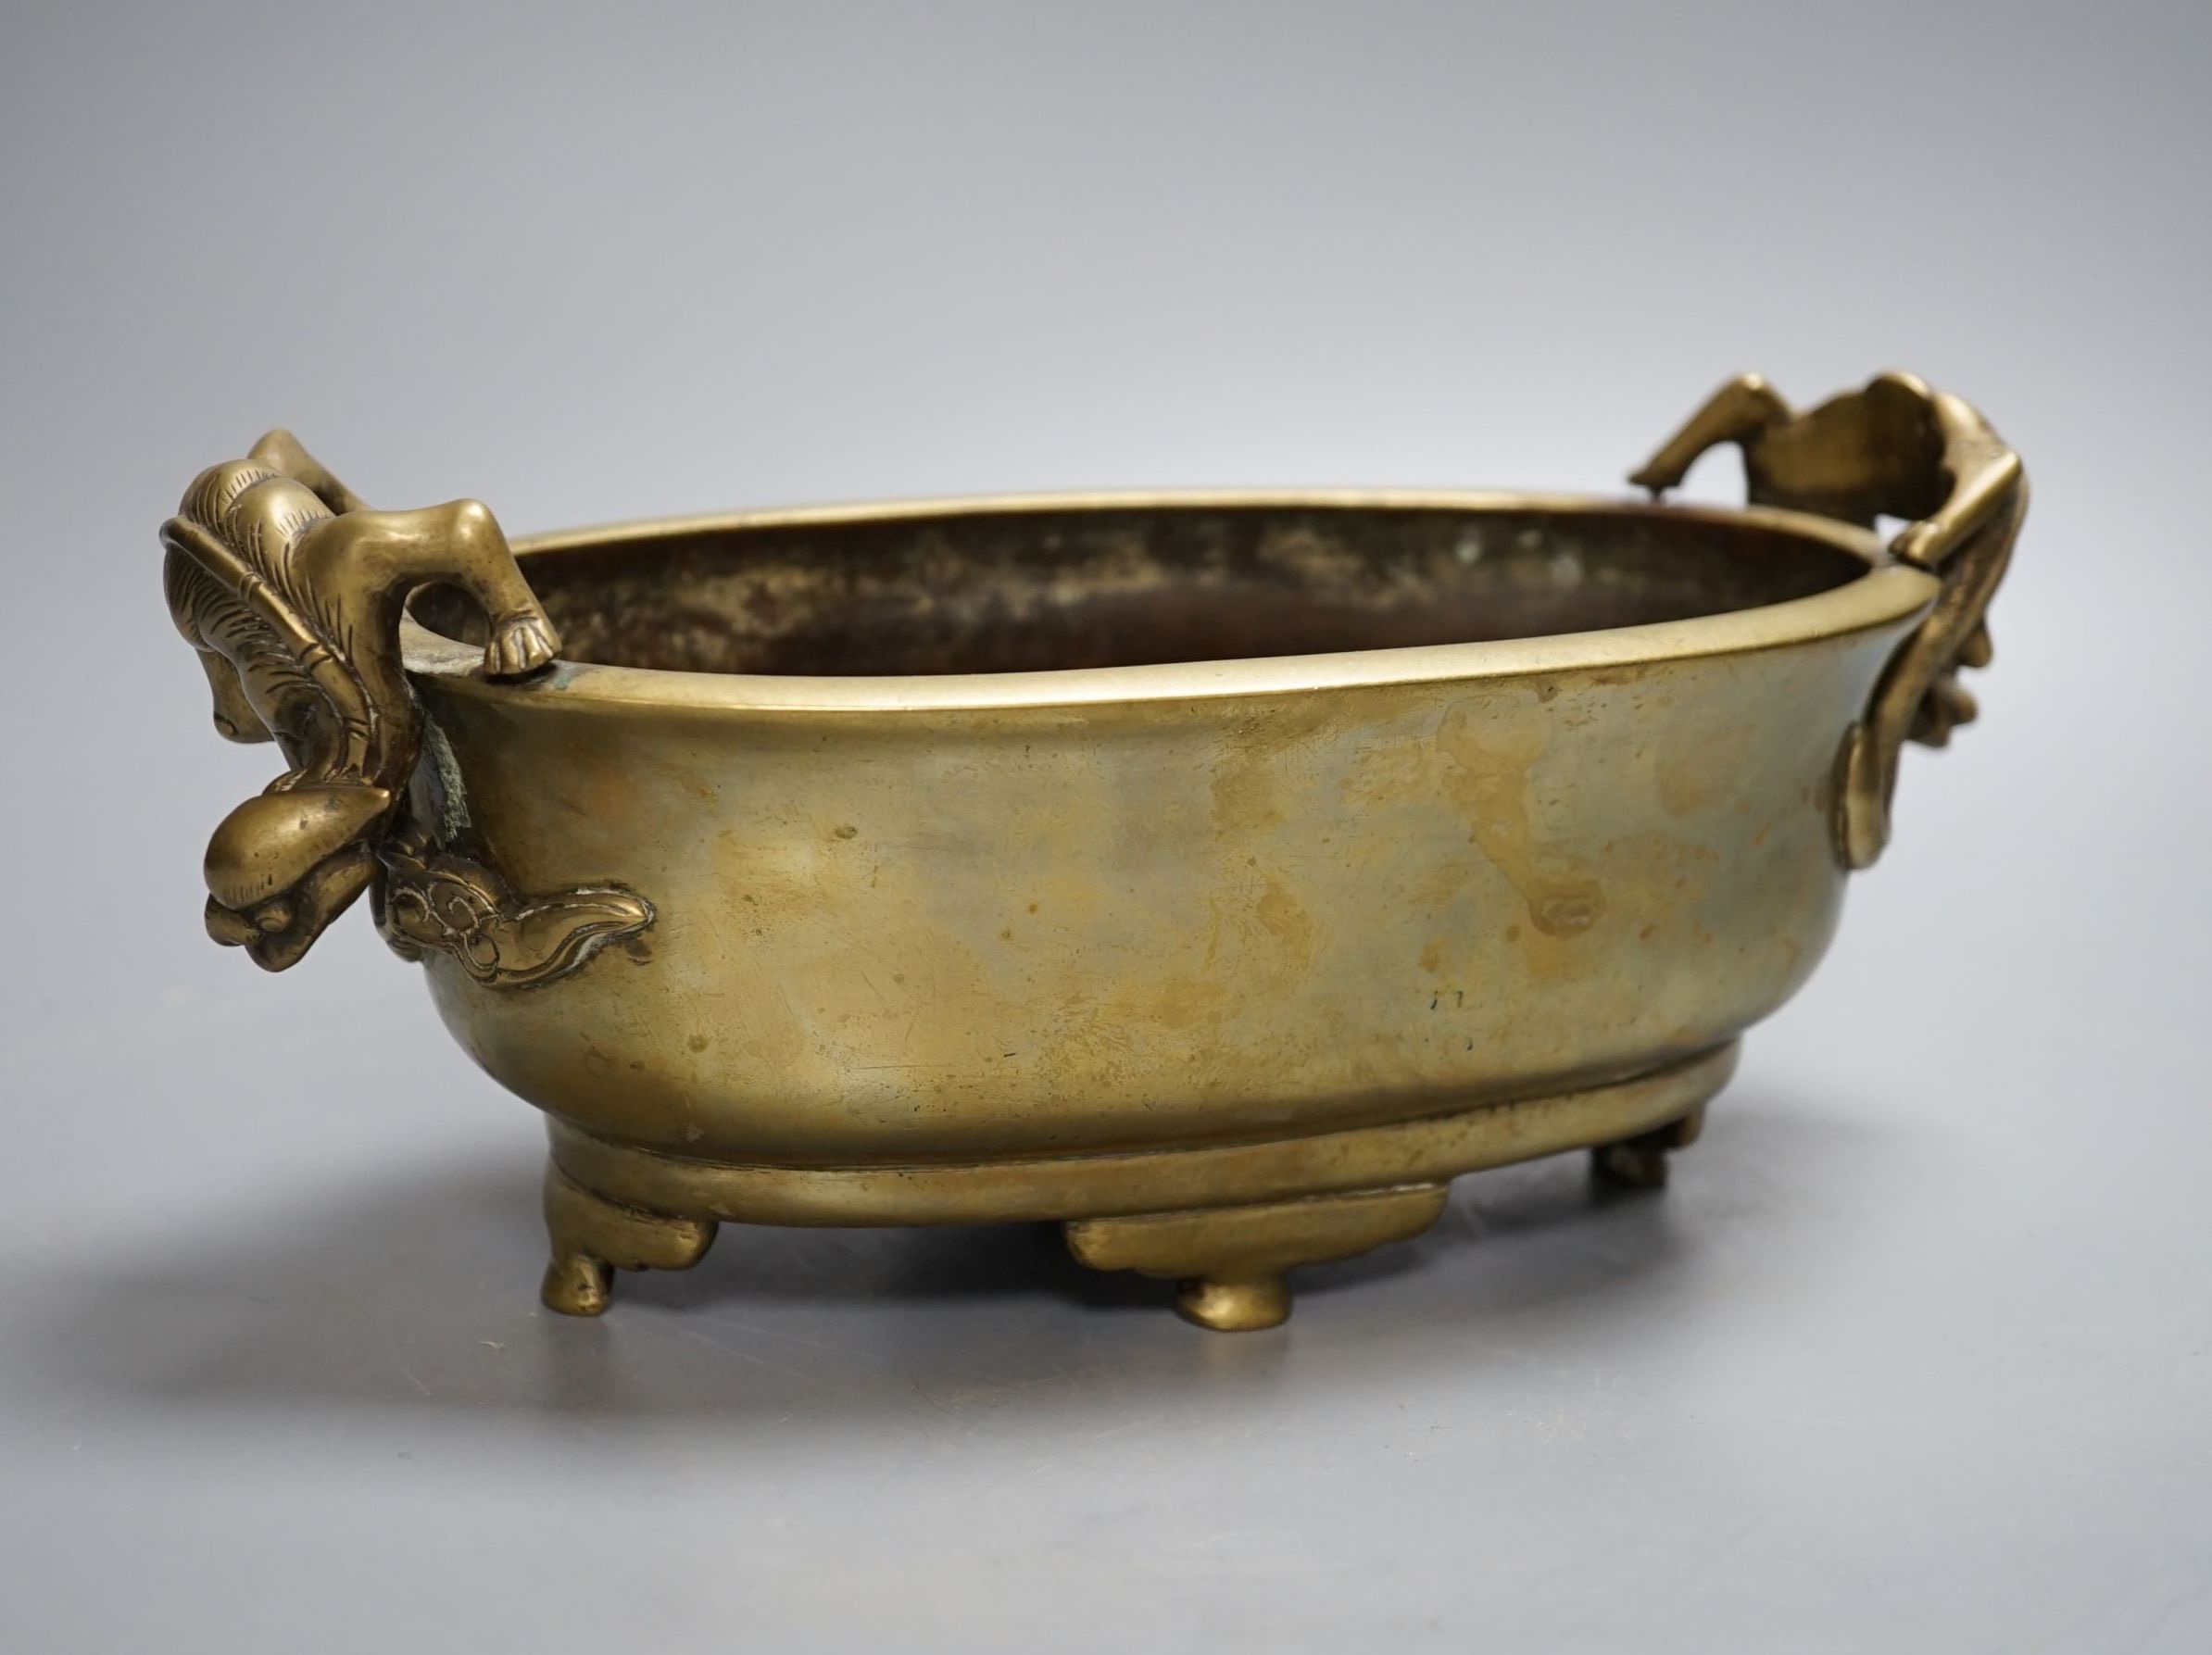 A 19th century Chinese bronze censer with ‘dragon’ handles, Xuande mark, 26cm